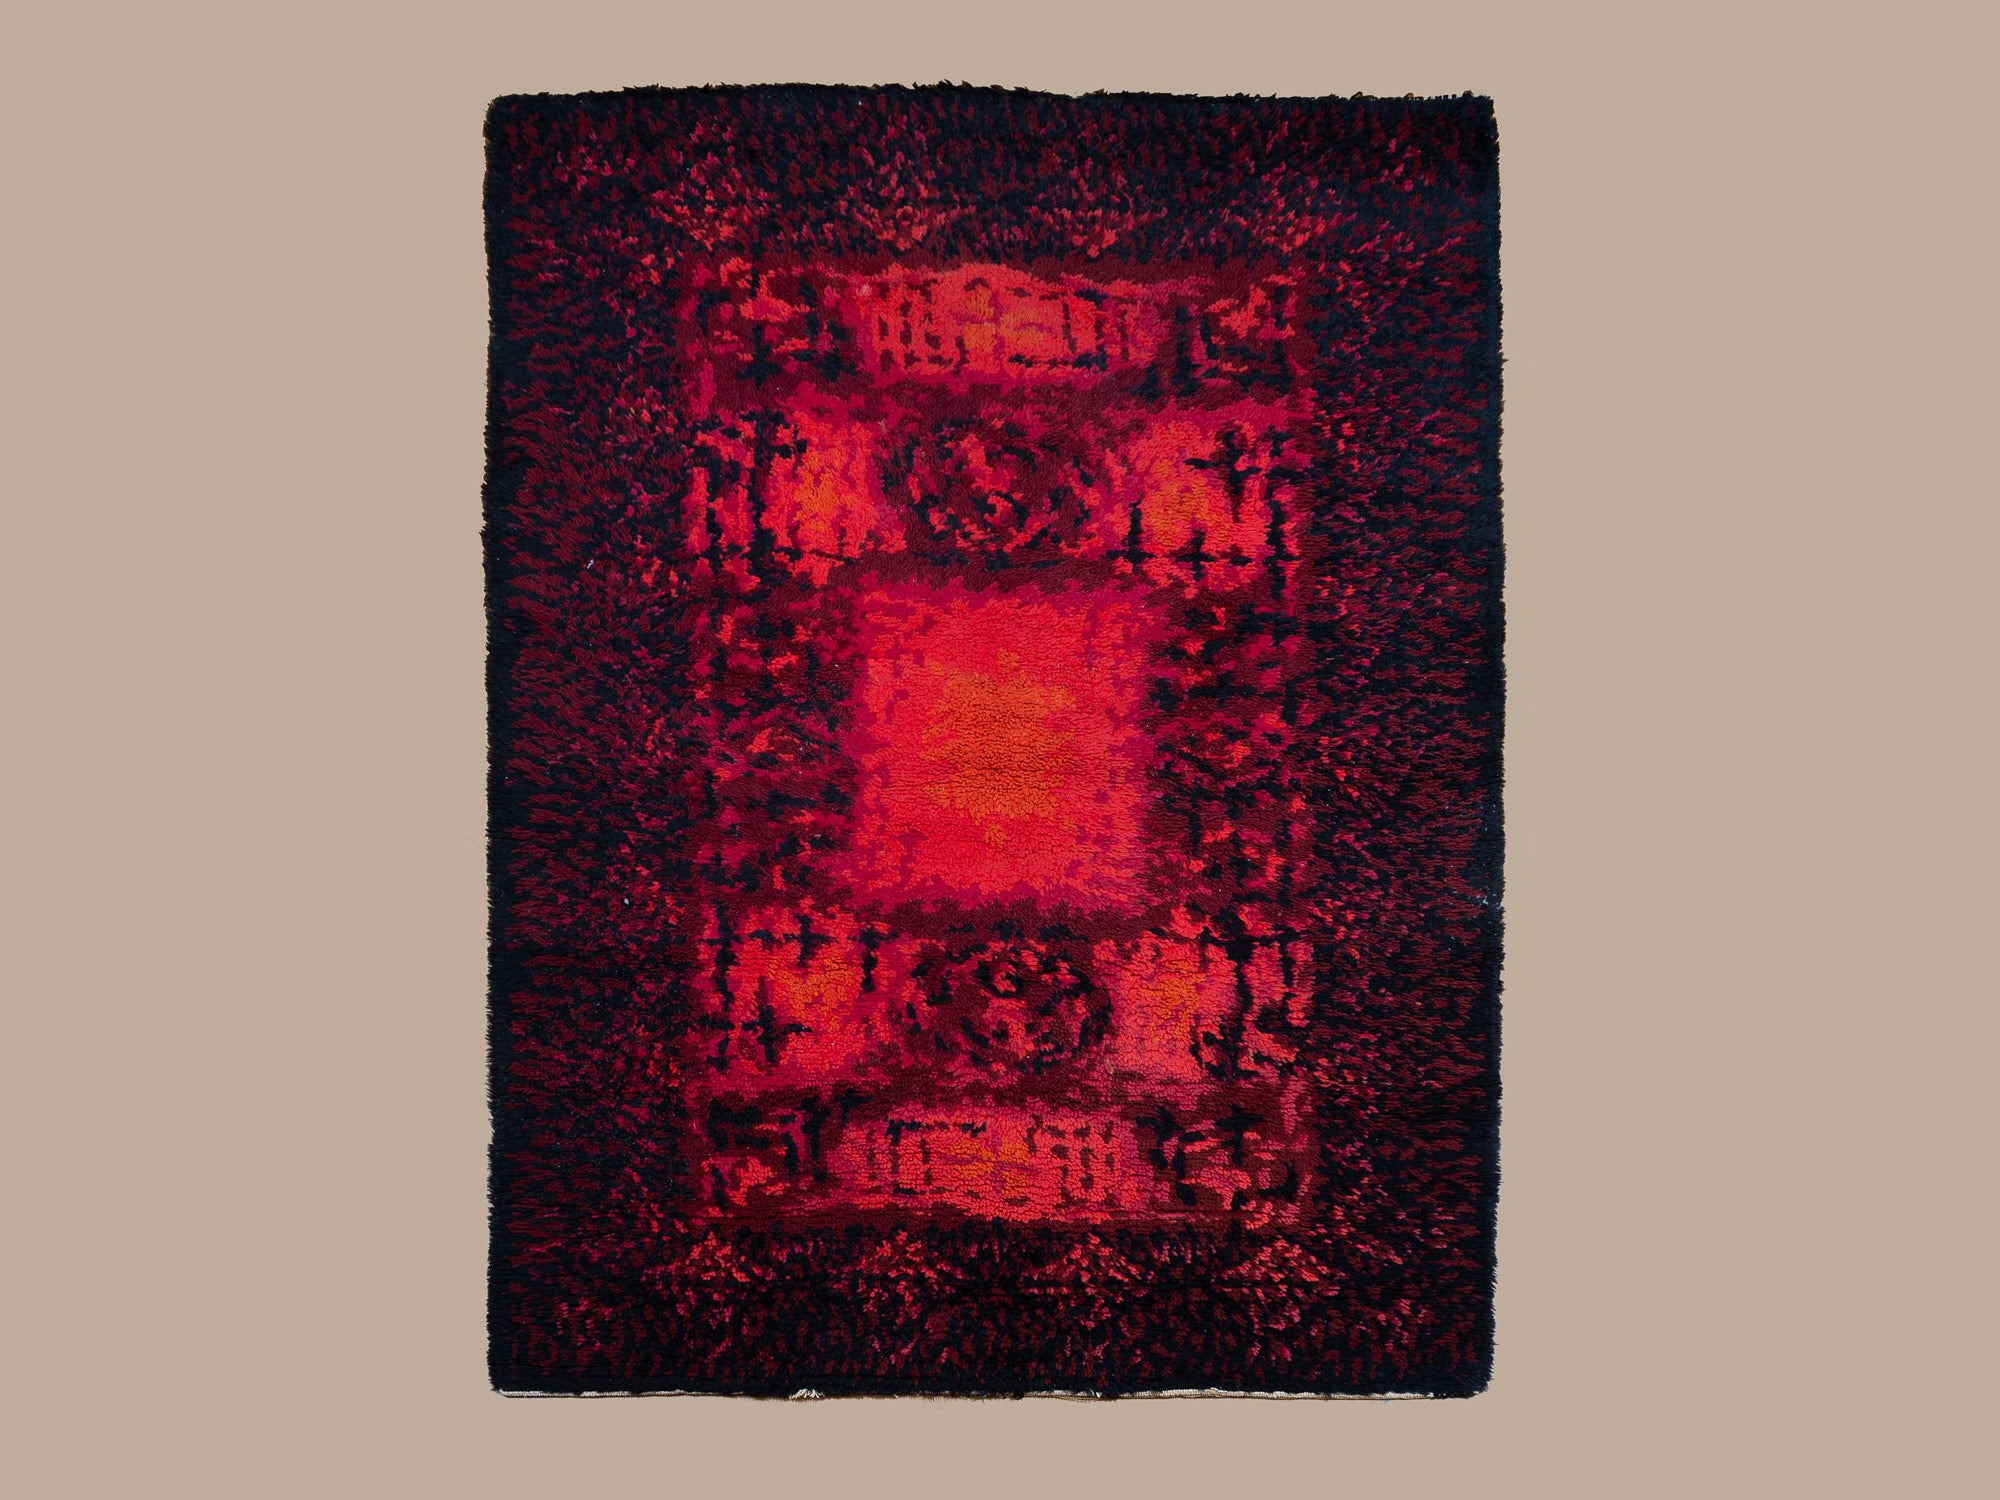 Tapisserie / Tapis Ryijy en laine, Finlande (vers 1960)..Ryijy rug / wall tapestry, Finland (ca. 1960)